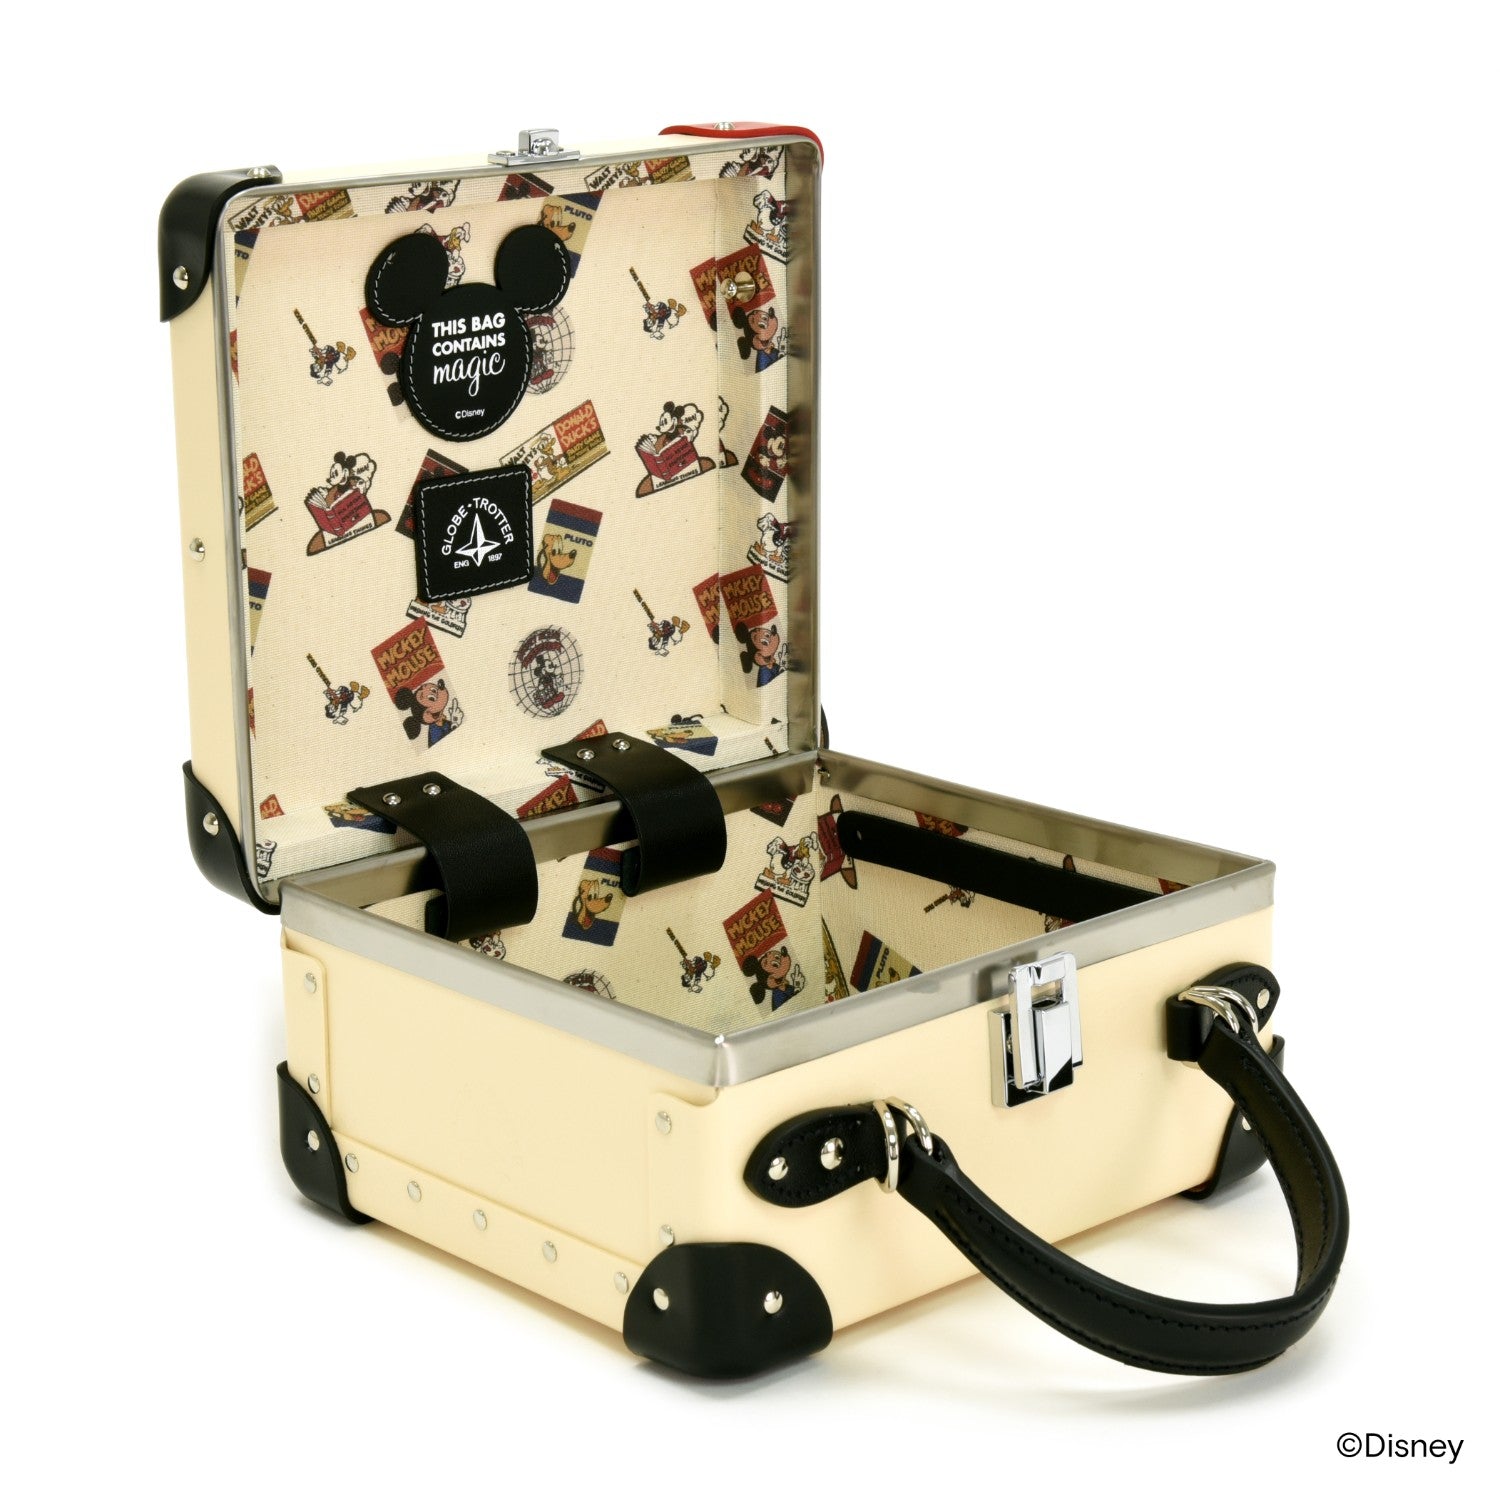 Disney - This Bag Contains Magic Collection · London Square | Ivory/Black - GLOBE-TROTTER